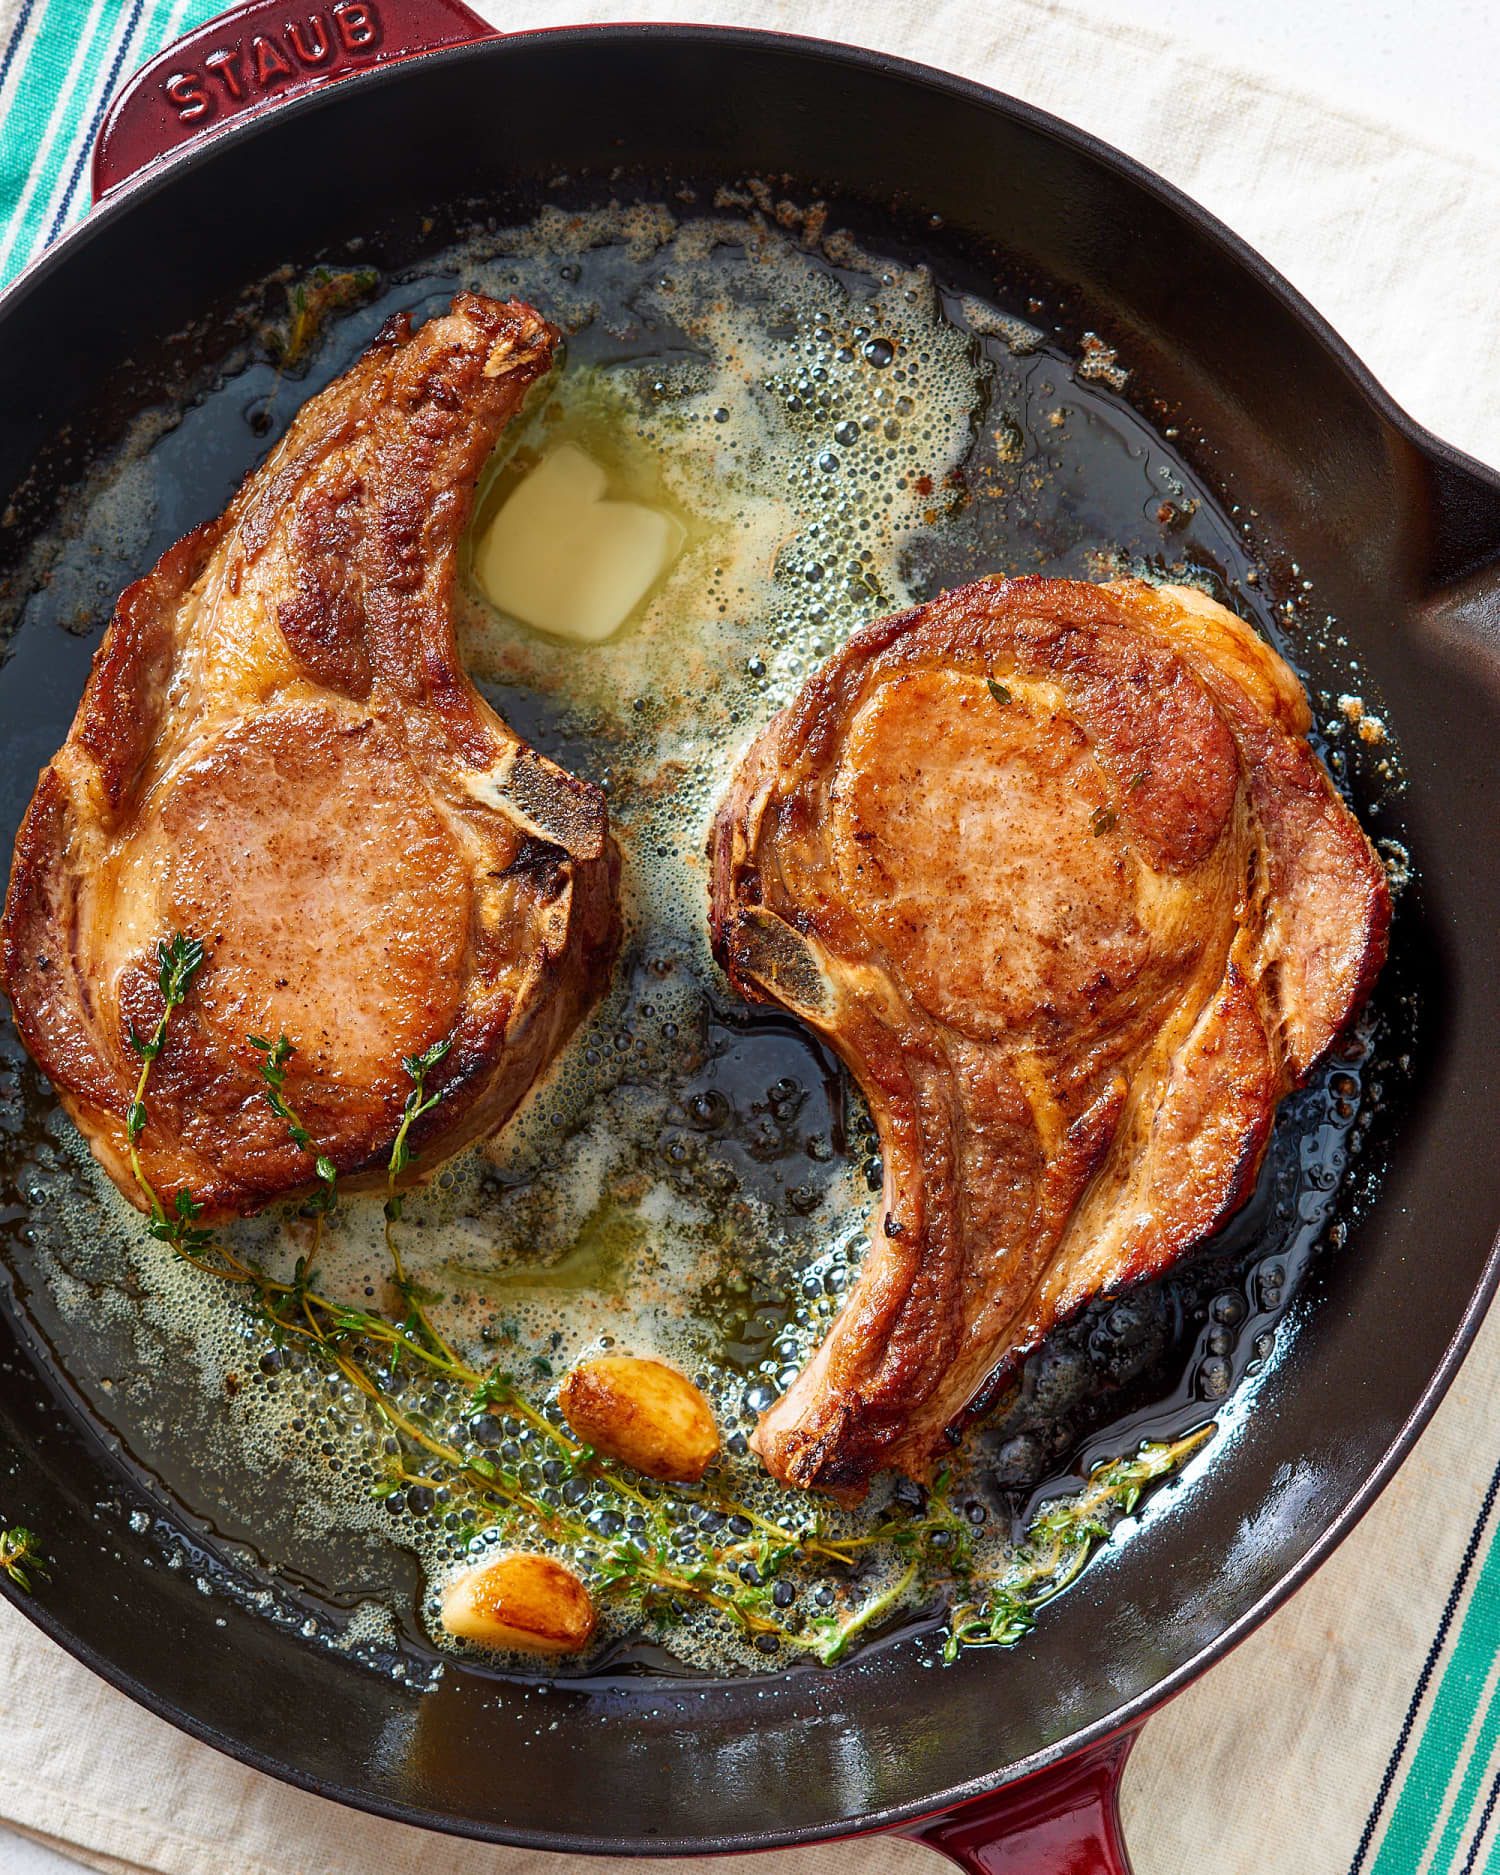 Lamb Chops On The Stove Savory Oven Roasted Lamb Chops Recipe With